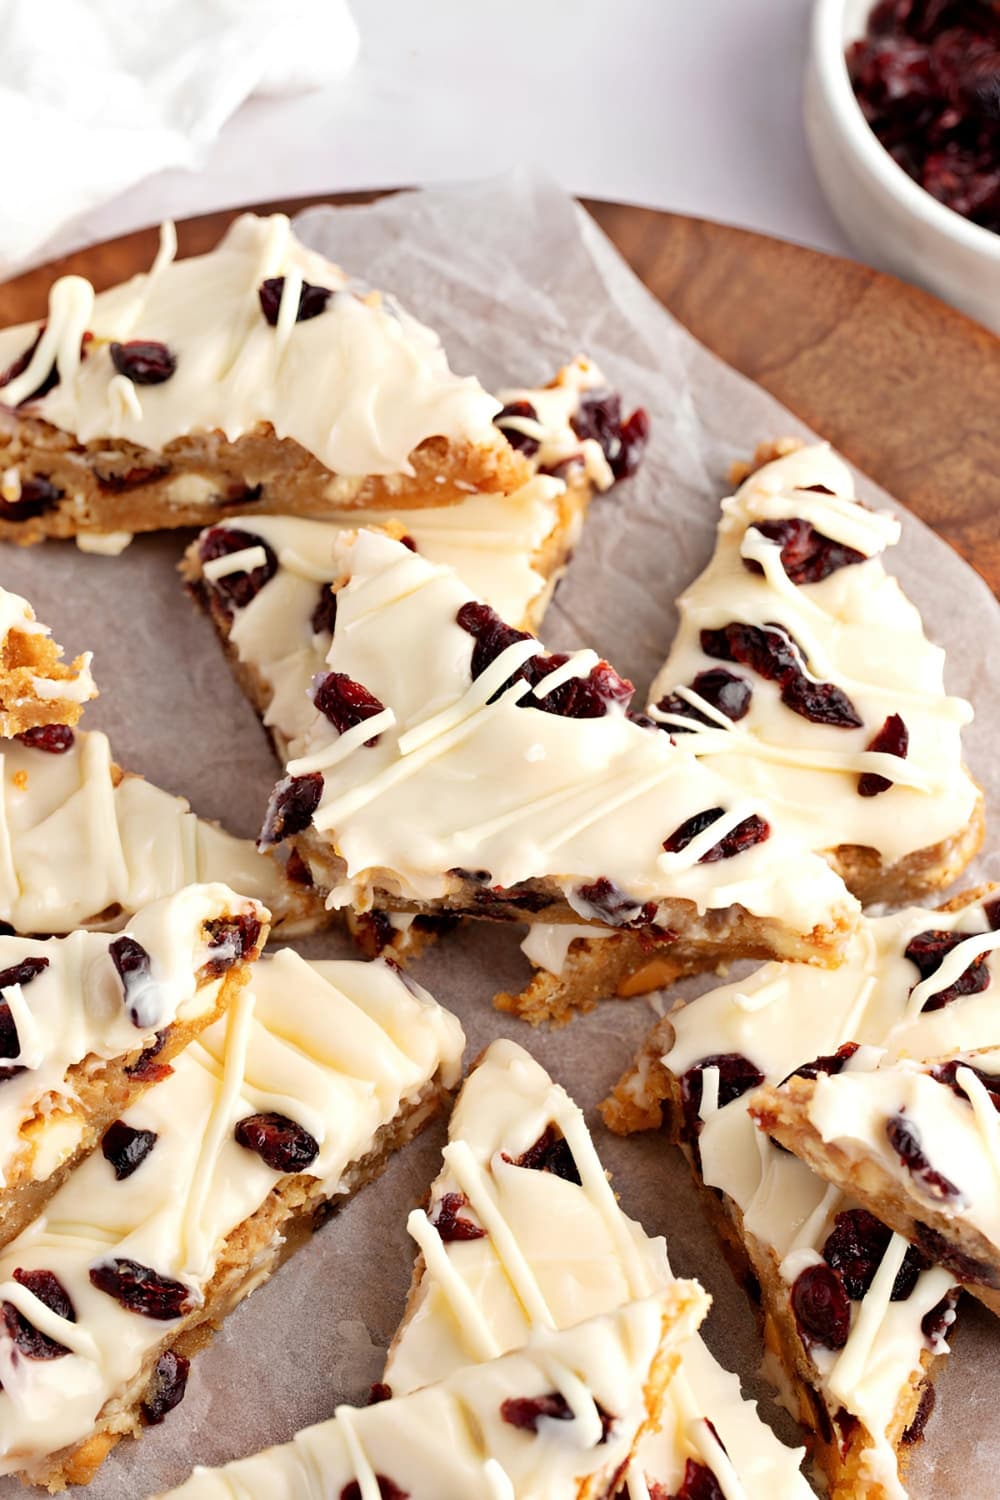 Sliced bars with cranberries topped with frosting and chocolate syrup.